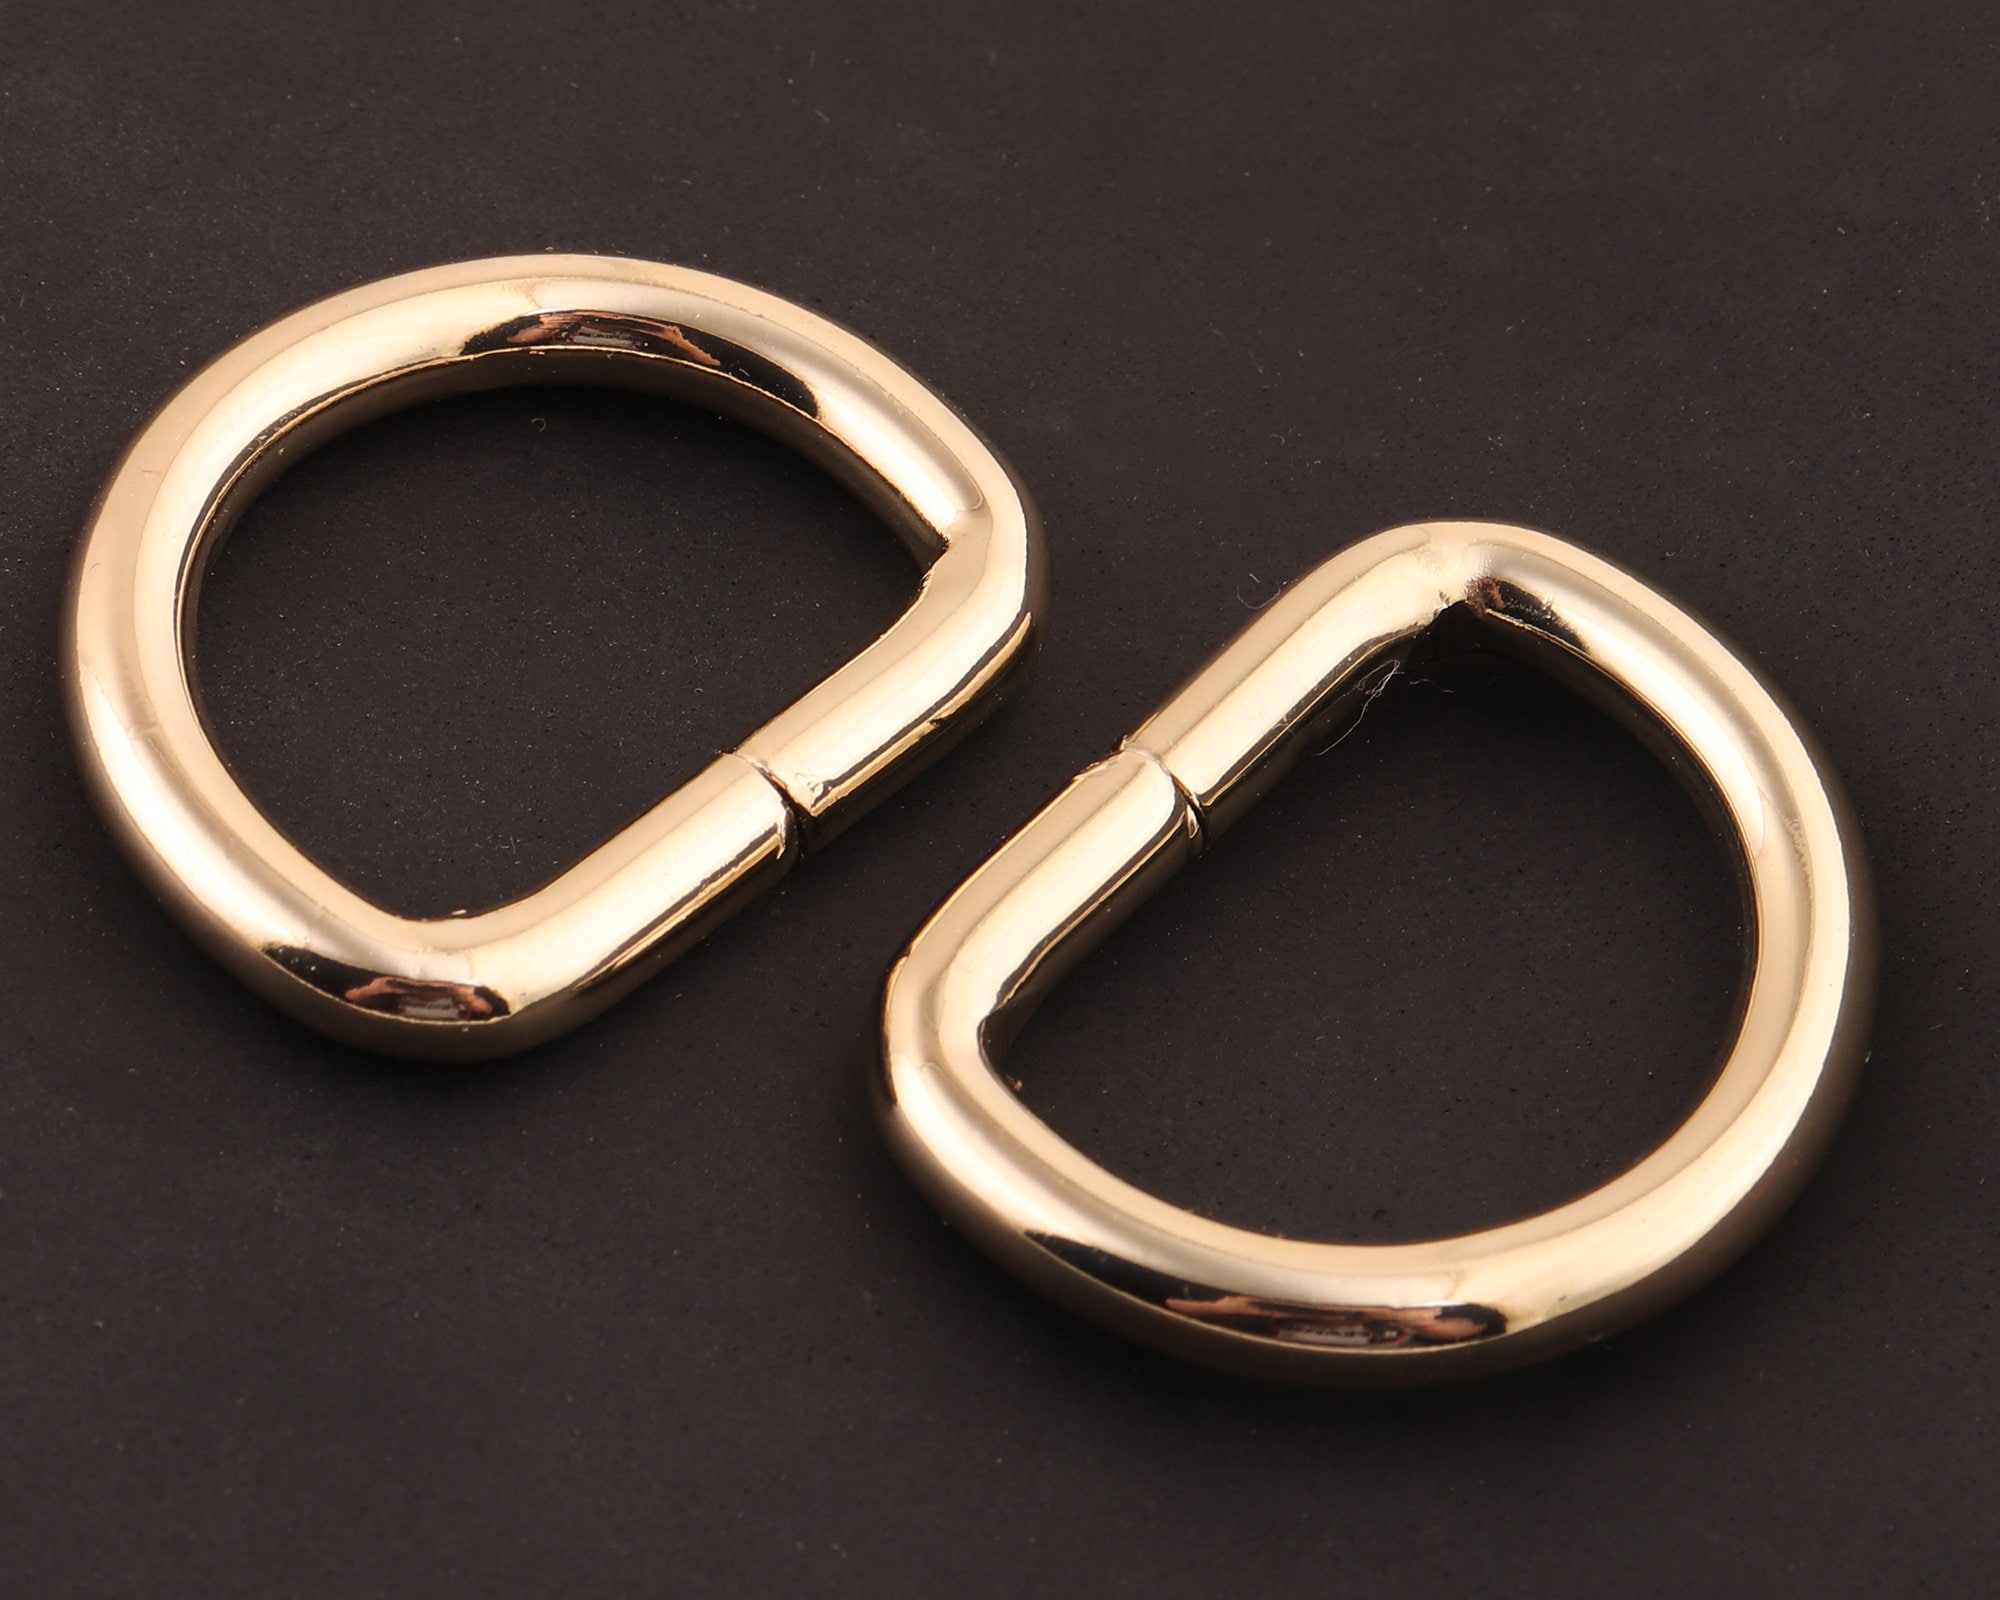 1 Inch26 Mmmetal Light Gold D Rings D Ring Buckle Purse Ring 